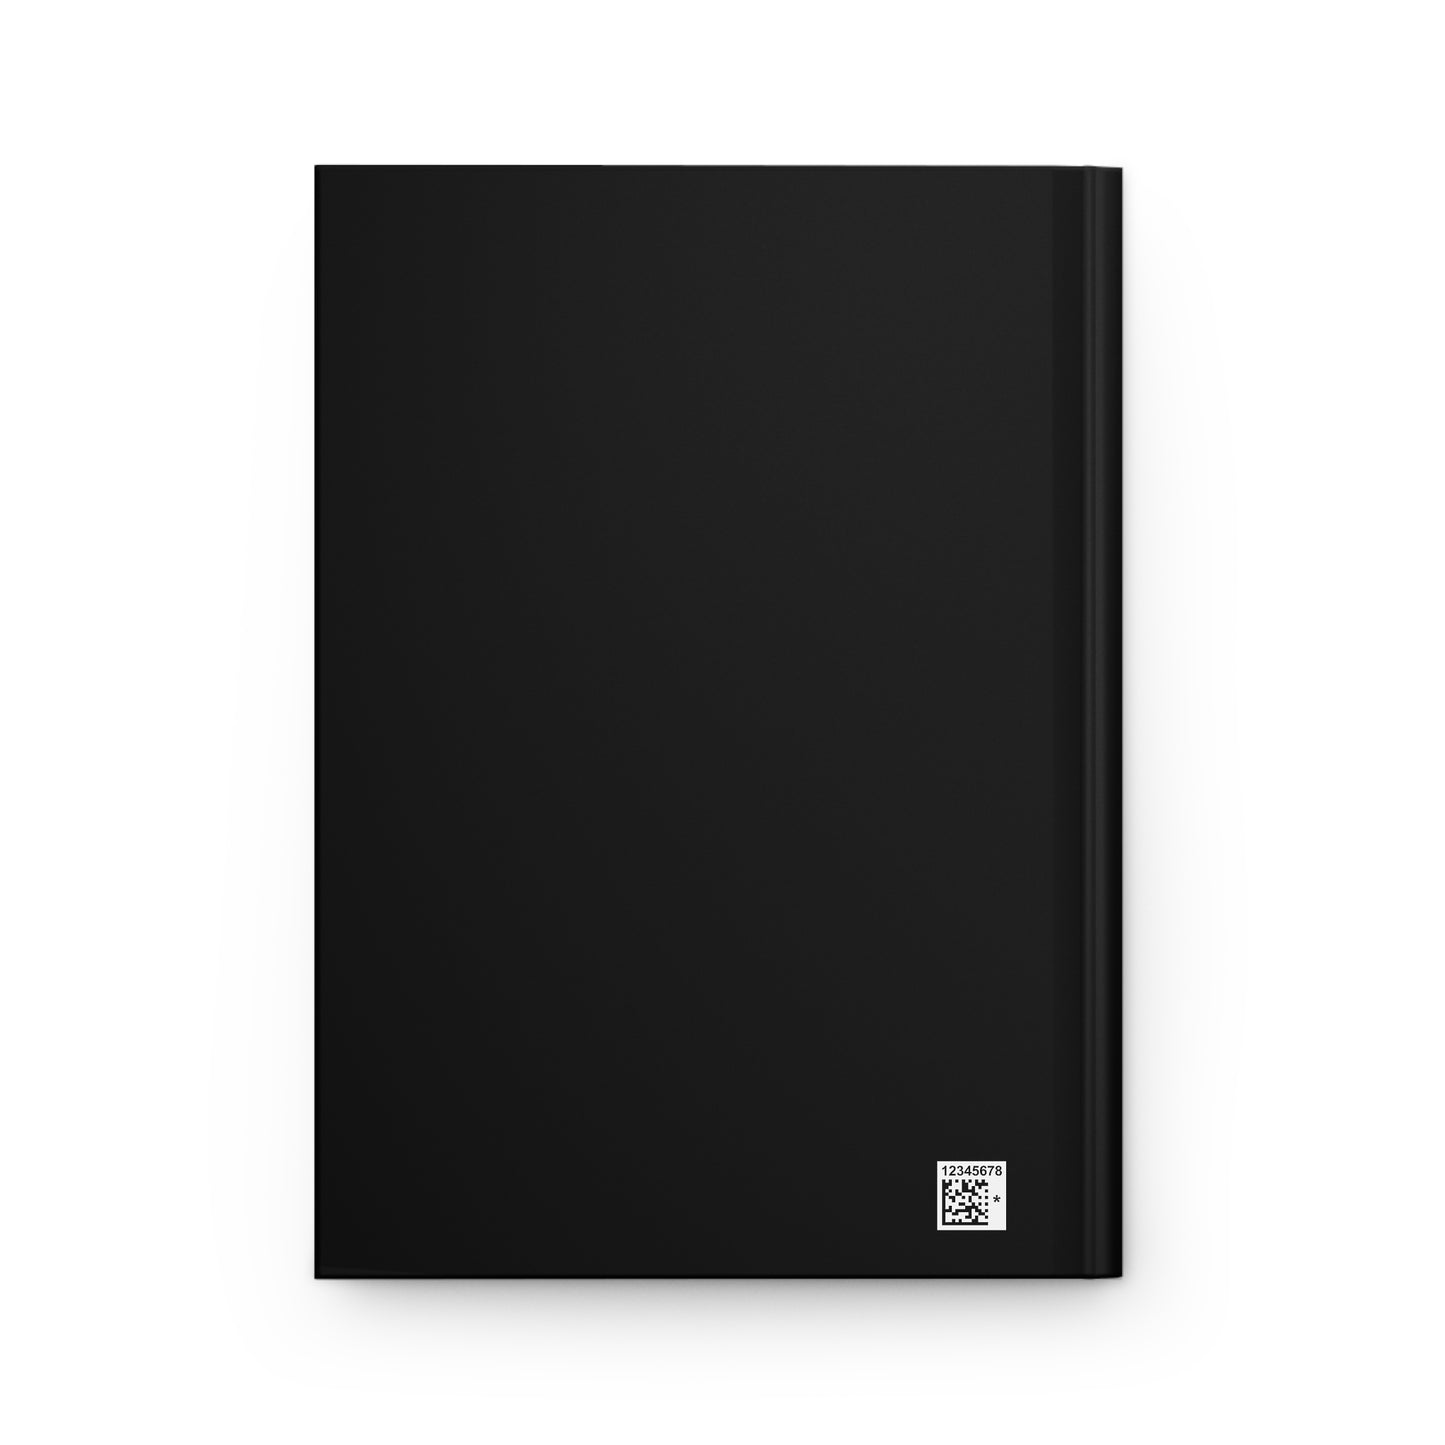 Proud Child Of A God Who Would Leave The 99 Looking For Me Hardcover Journal Matte